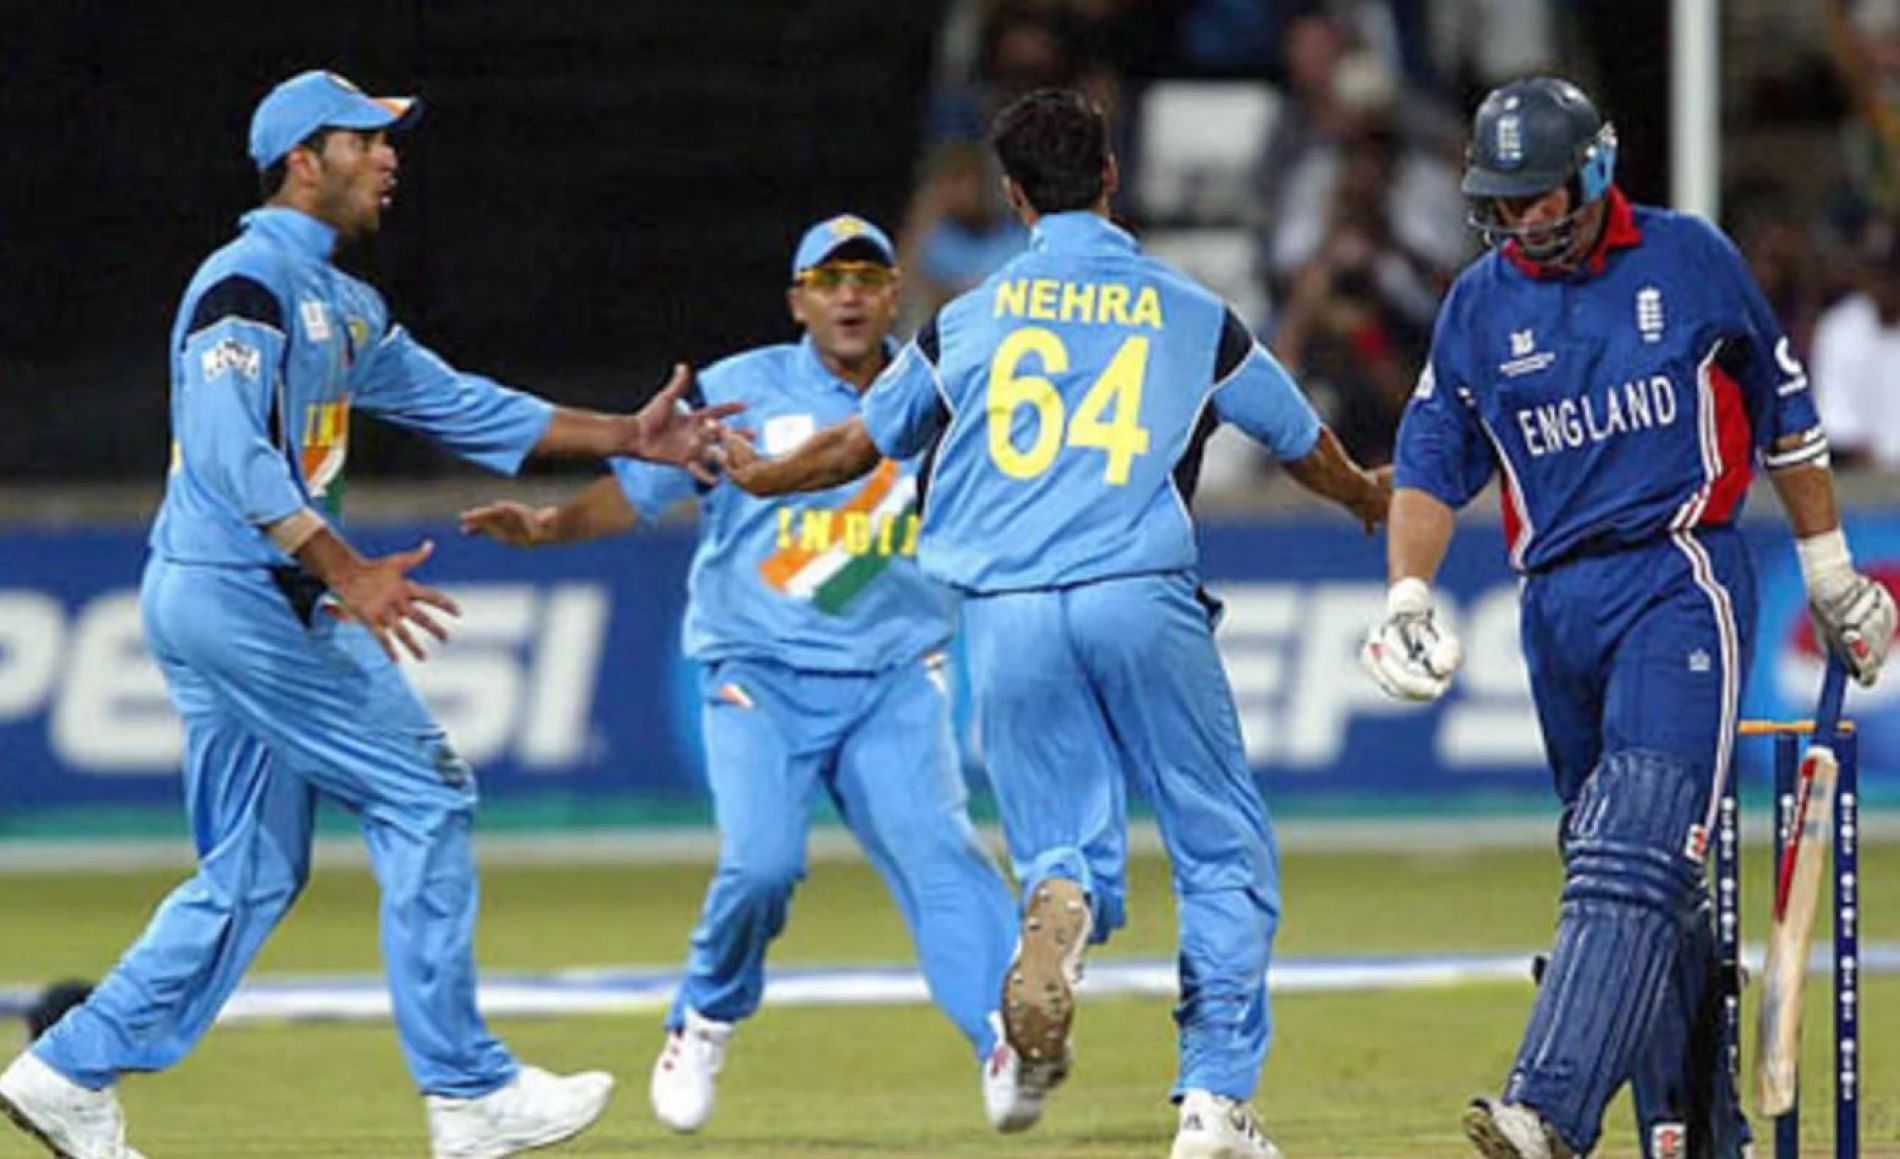 Nehra wrecked England&#039;s top order in the 2003 World Cup.